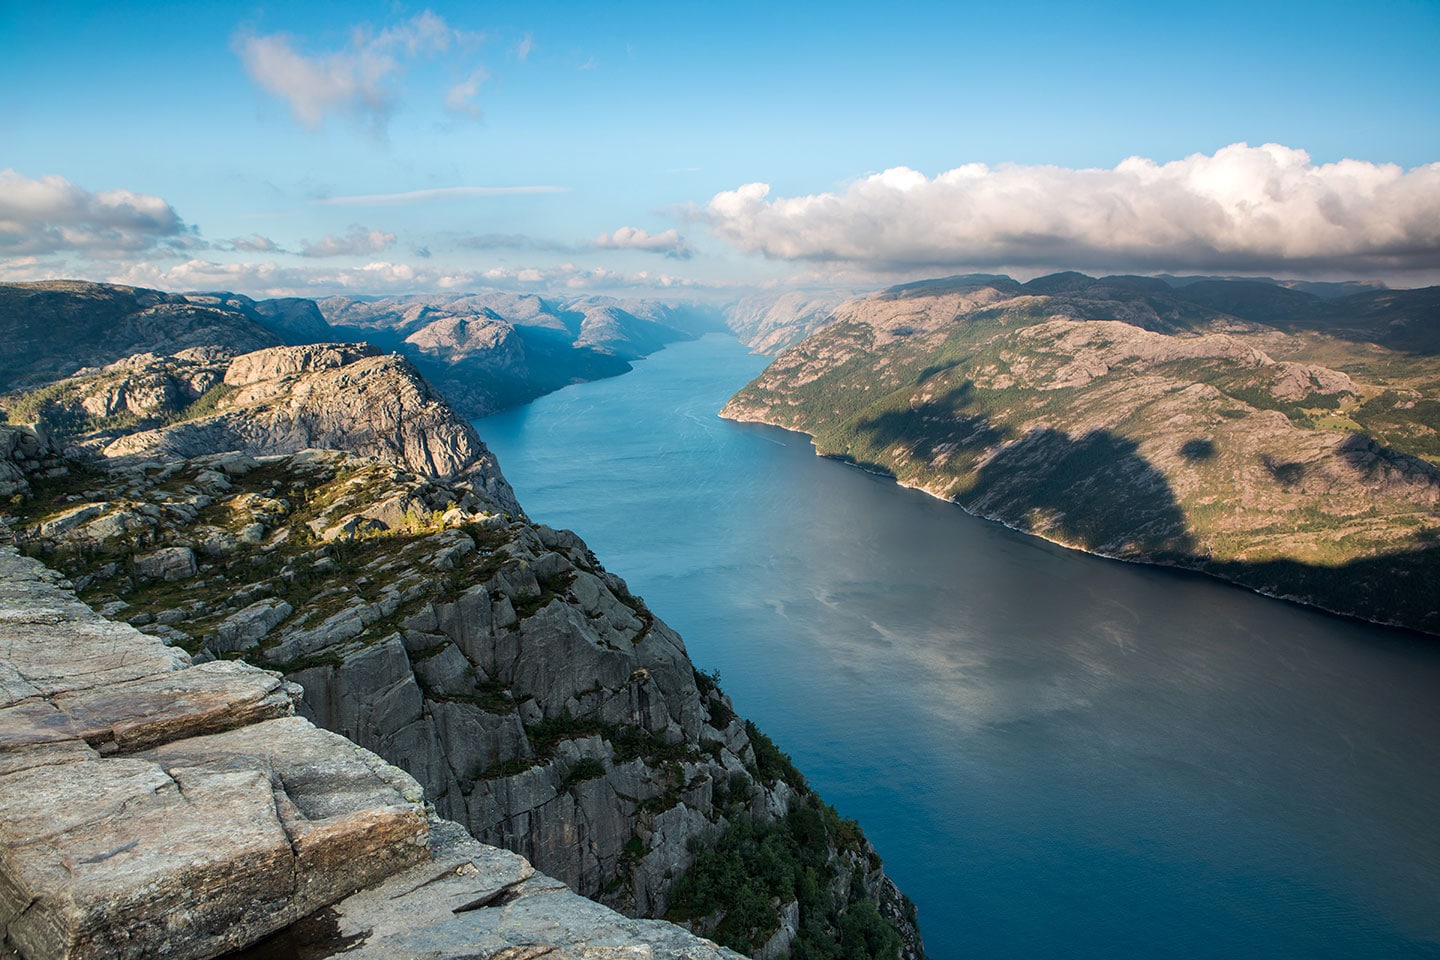 Fjord view from Preikestolen during a travel photography trip in Norway